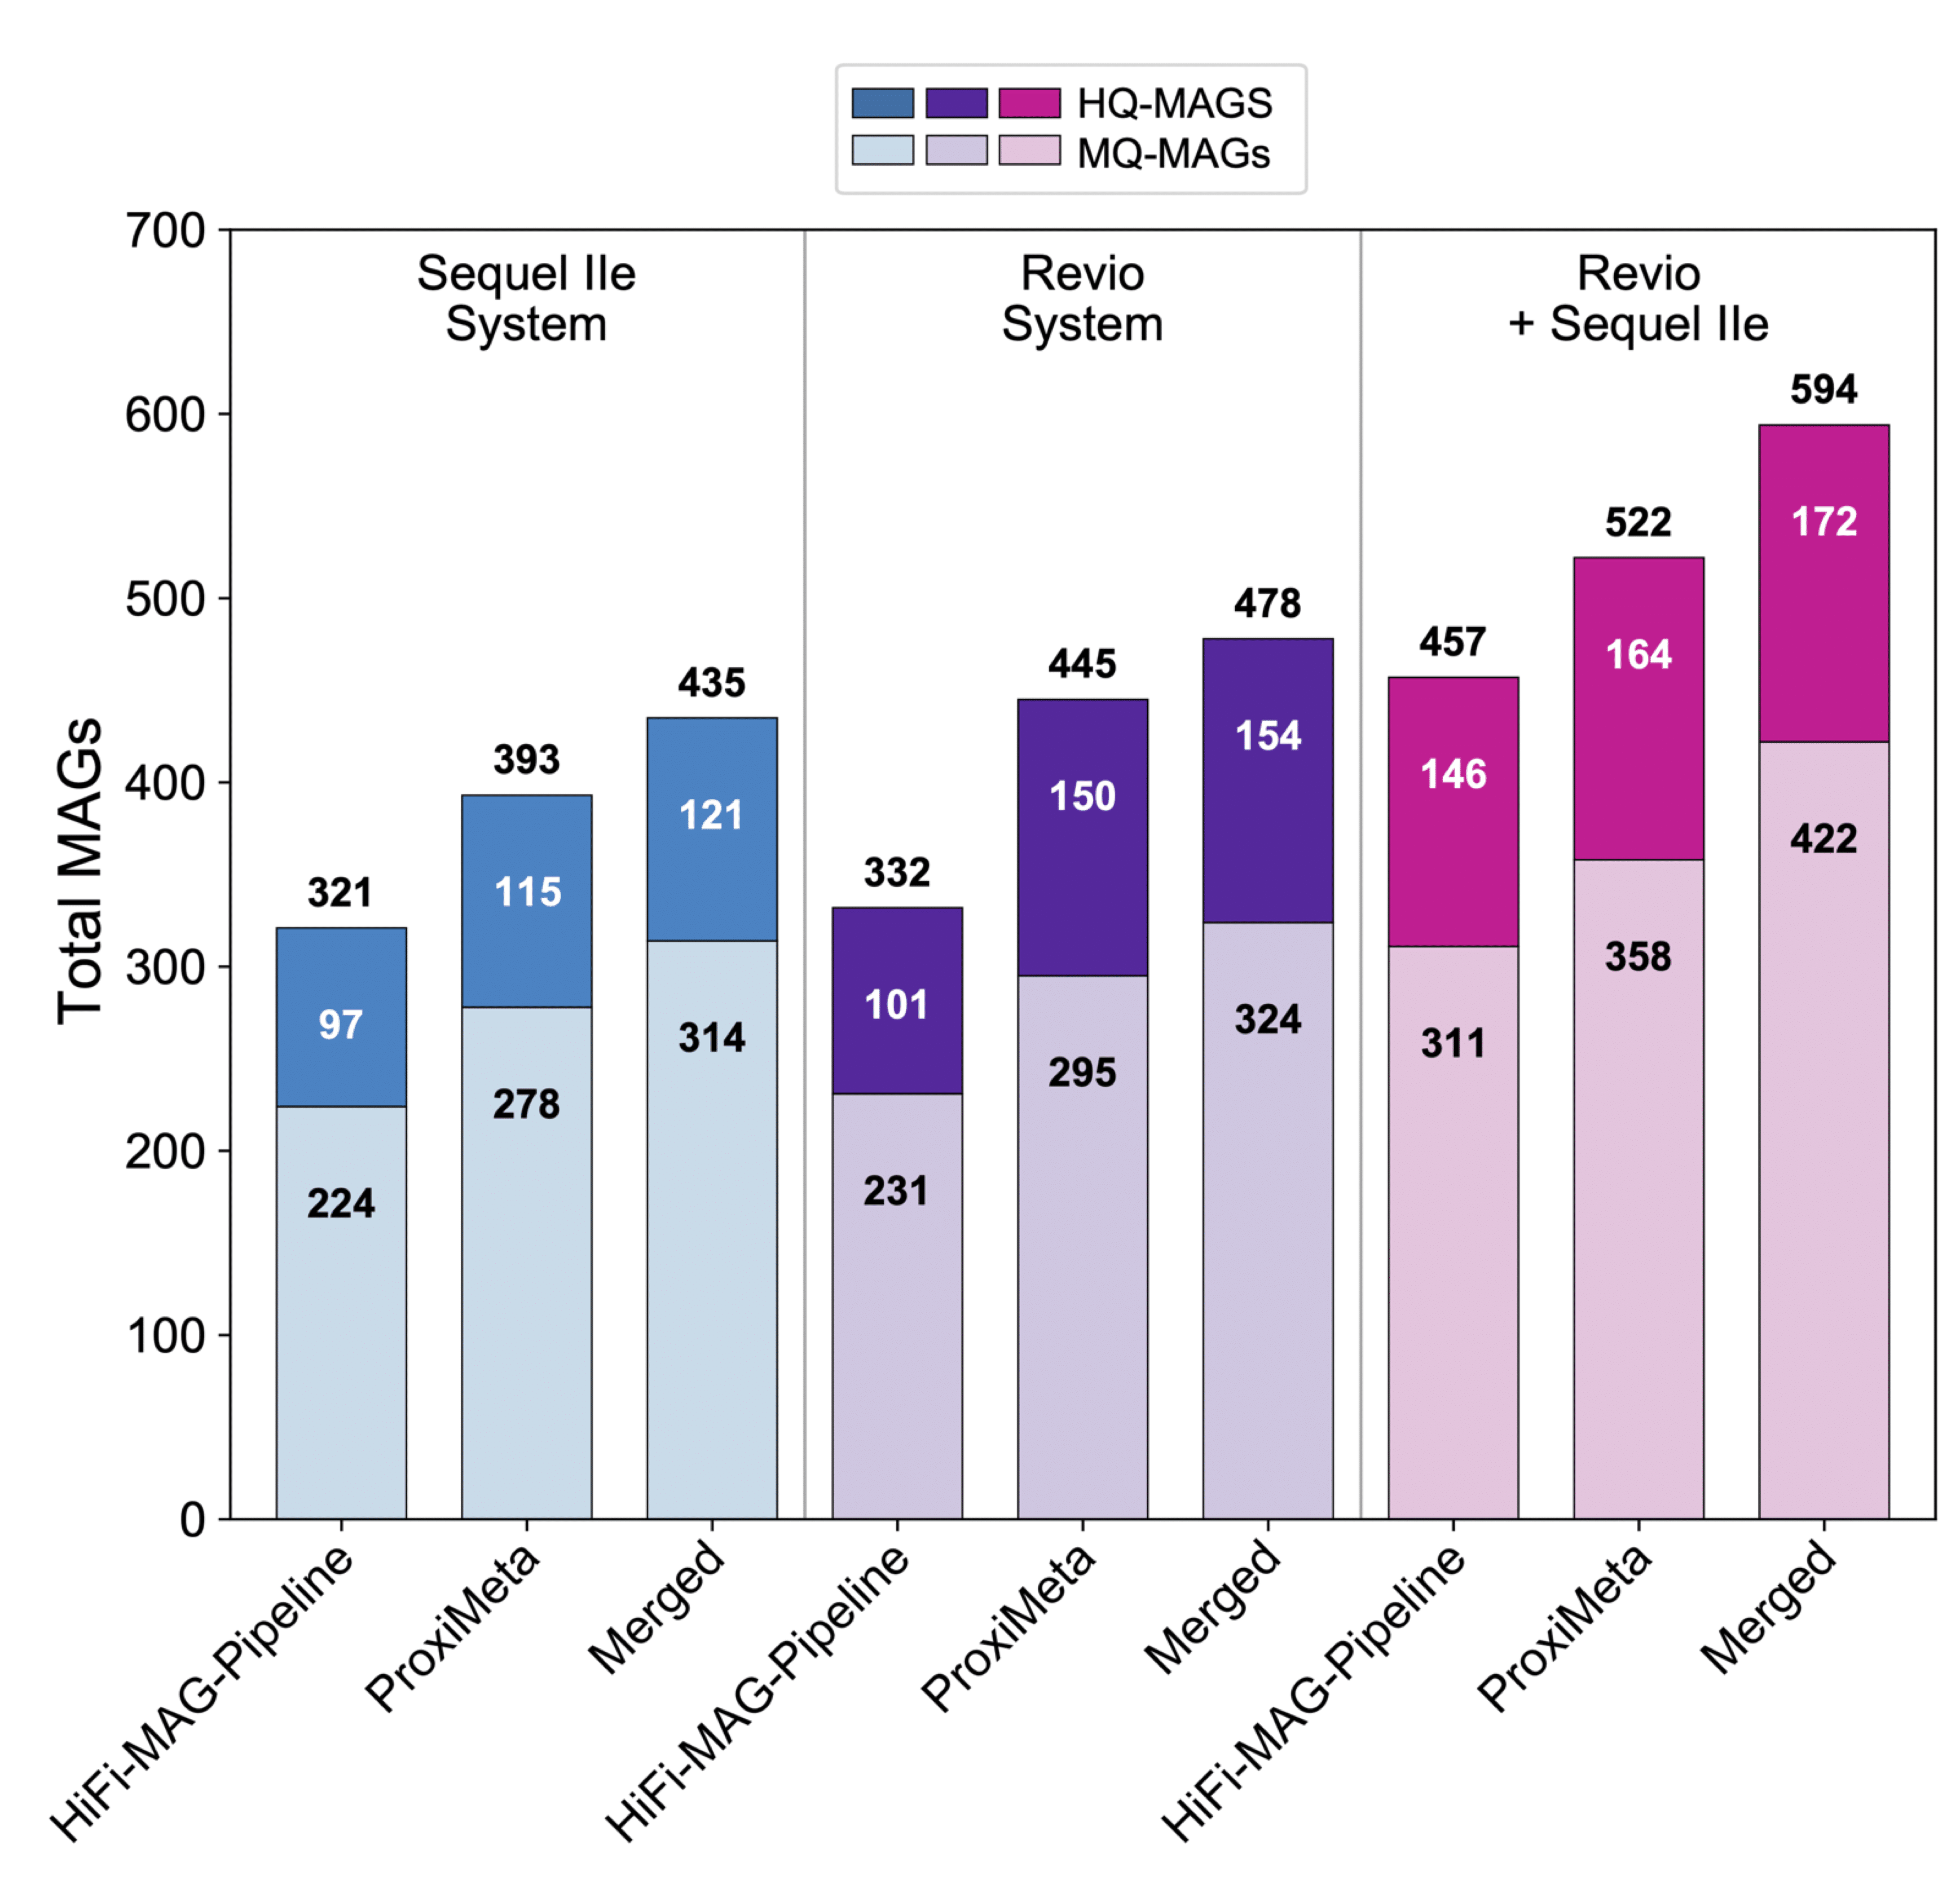 Figure 2. Total number of high-quality MAGS (HQ-MAGs) and medium-quality MAGS (MQ-MAGs) assembled during an analysis of the ZymoBIOMICS Fecal Reference using PacBio HiFi metagenome sequencing. MAGs were identified using the HiFi-MAG-Pipeline, Proximeta, and a merged approach as outlined in figure 1. Separate studies of the reference sample were performed on the Sequel IIe and Revio systems. Findings from these two separate experiments were combined to create a catalog of total unique MAGs discovered within this Zymo reference sample.